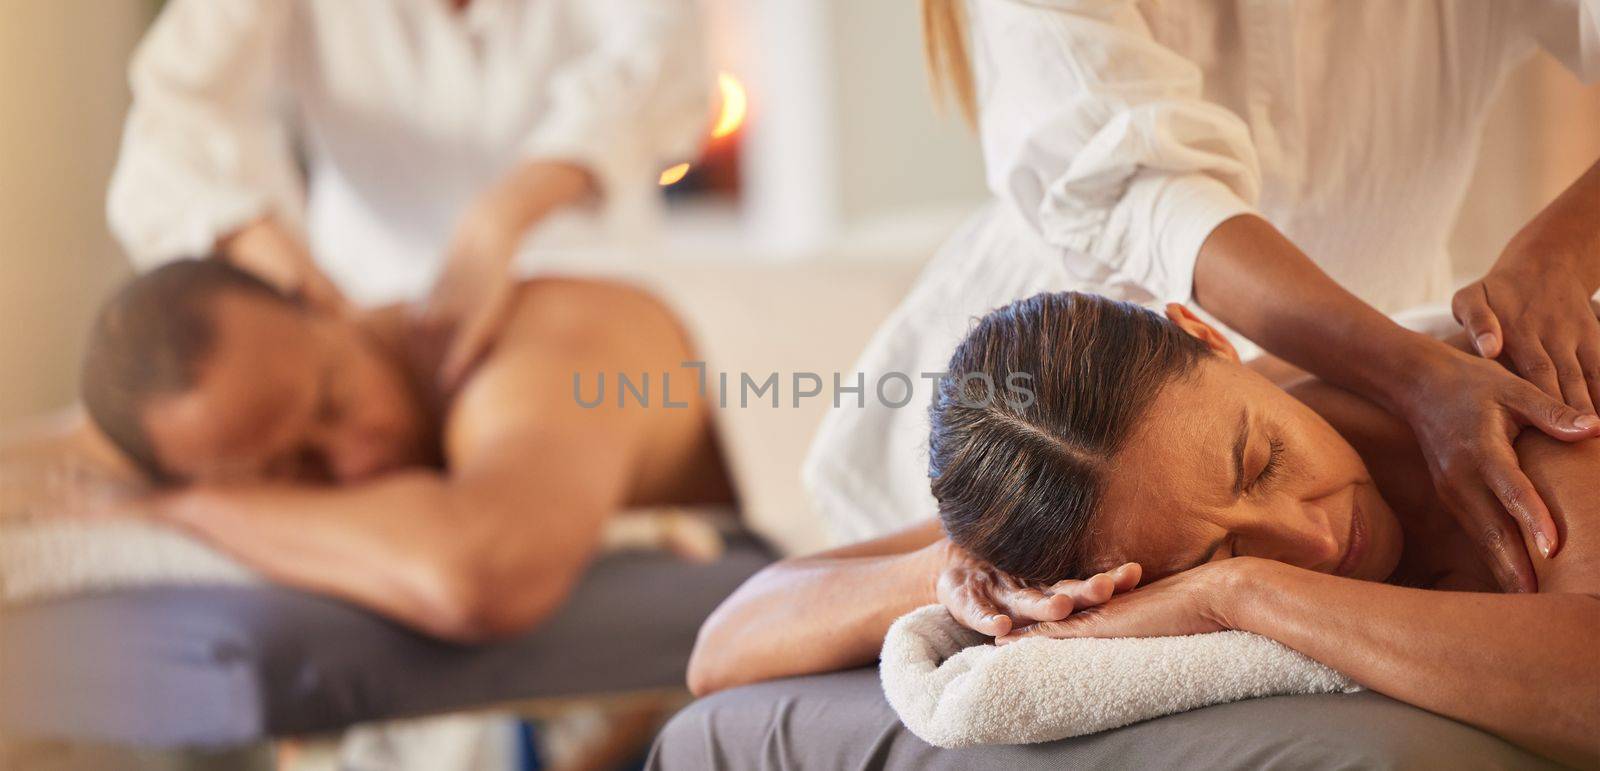 Massage, relax and peace with couple in spa for healing, health and zen treatment. Detox, skincare and beauty with hands of massage therapist on man and woman for calm, physical therapy and luxury.